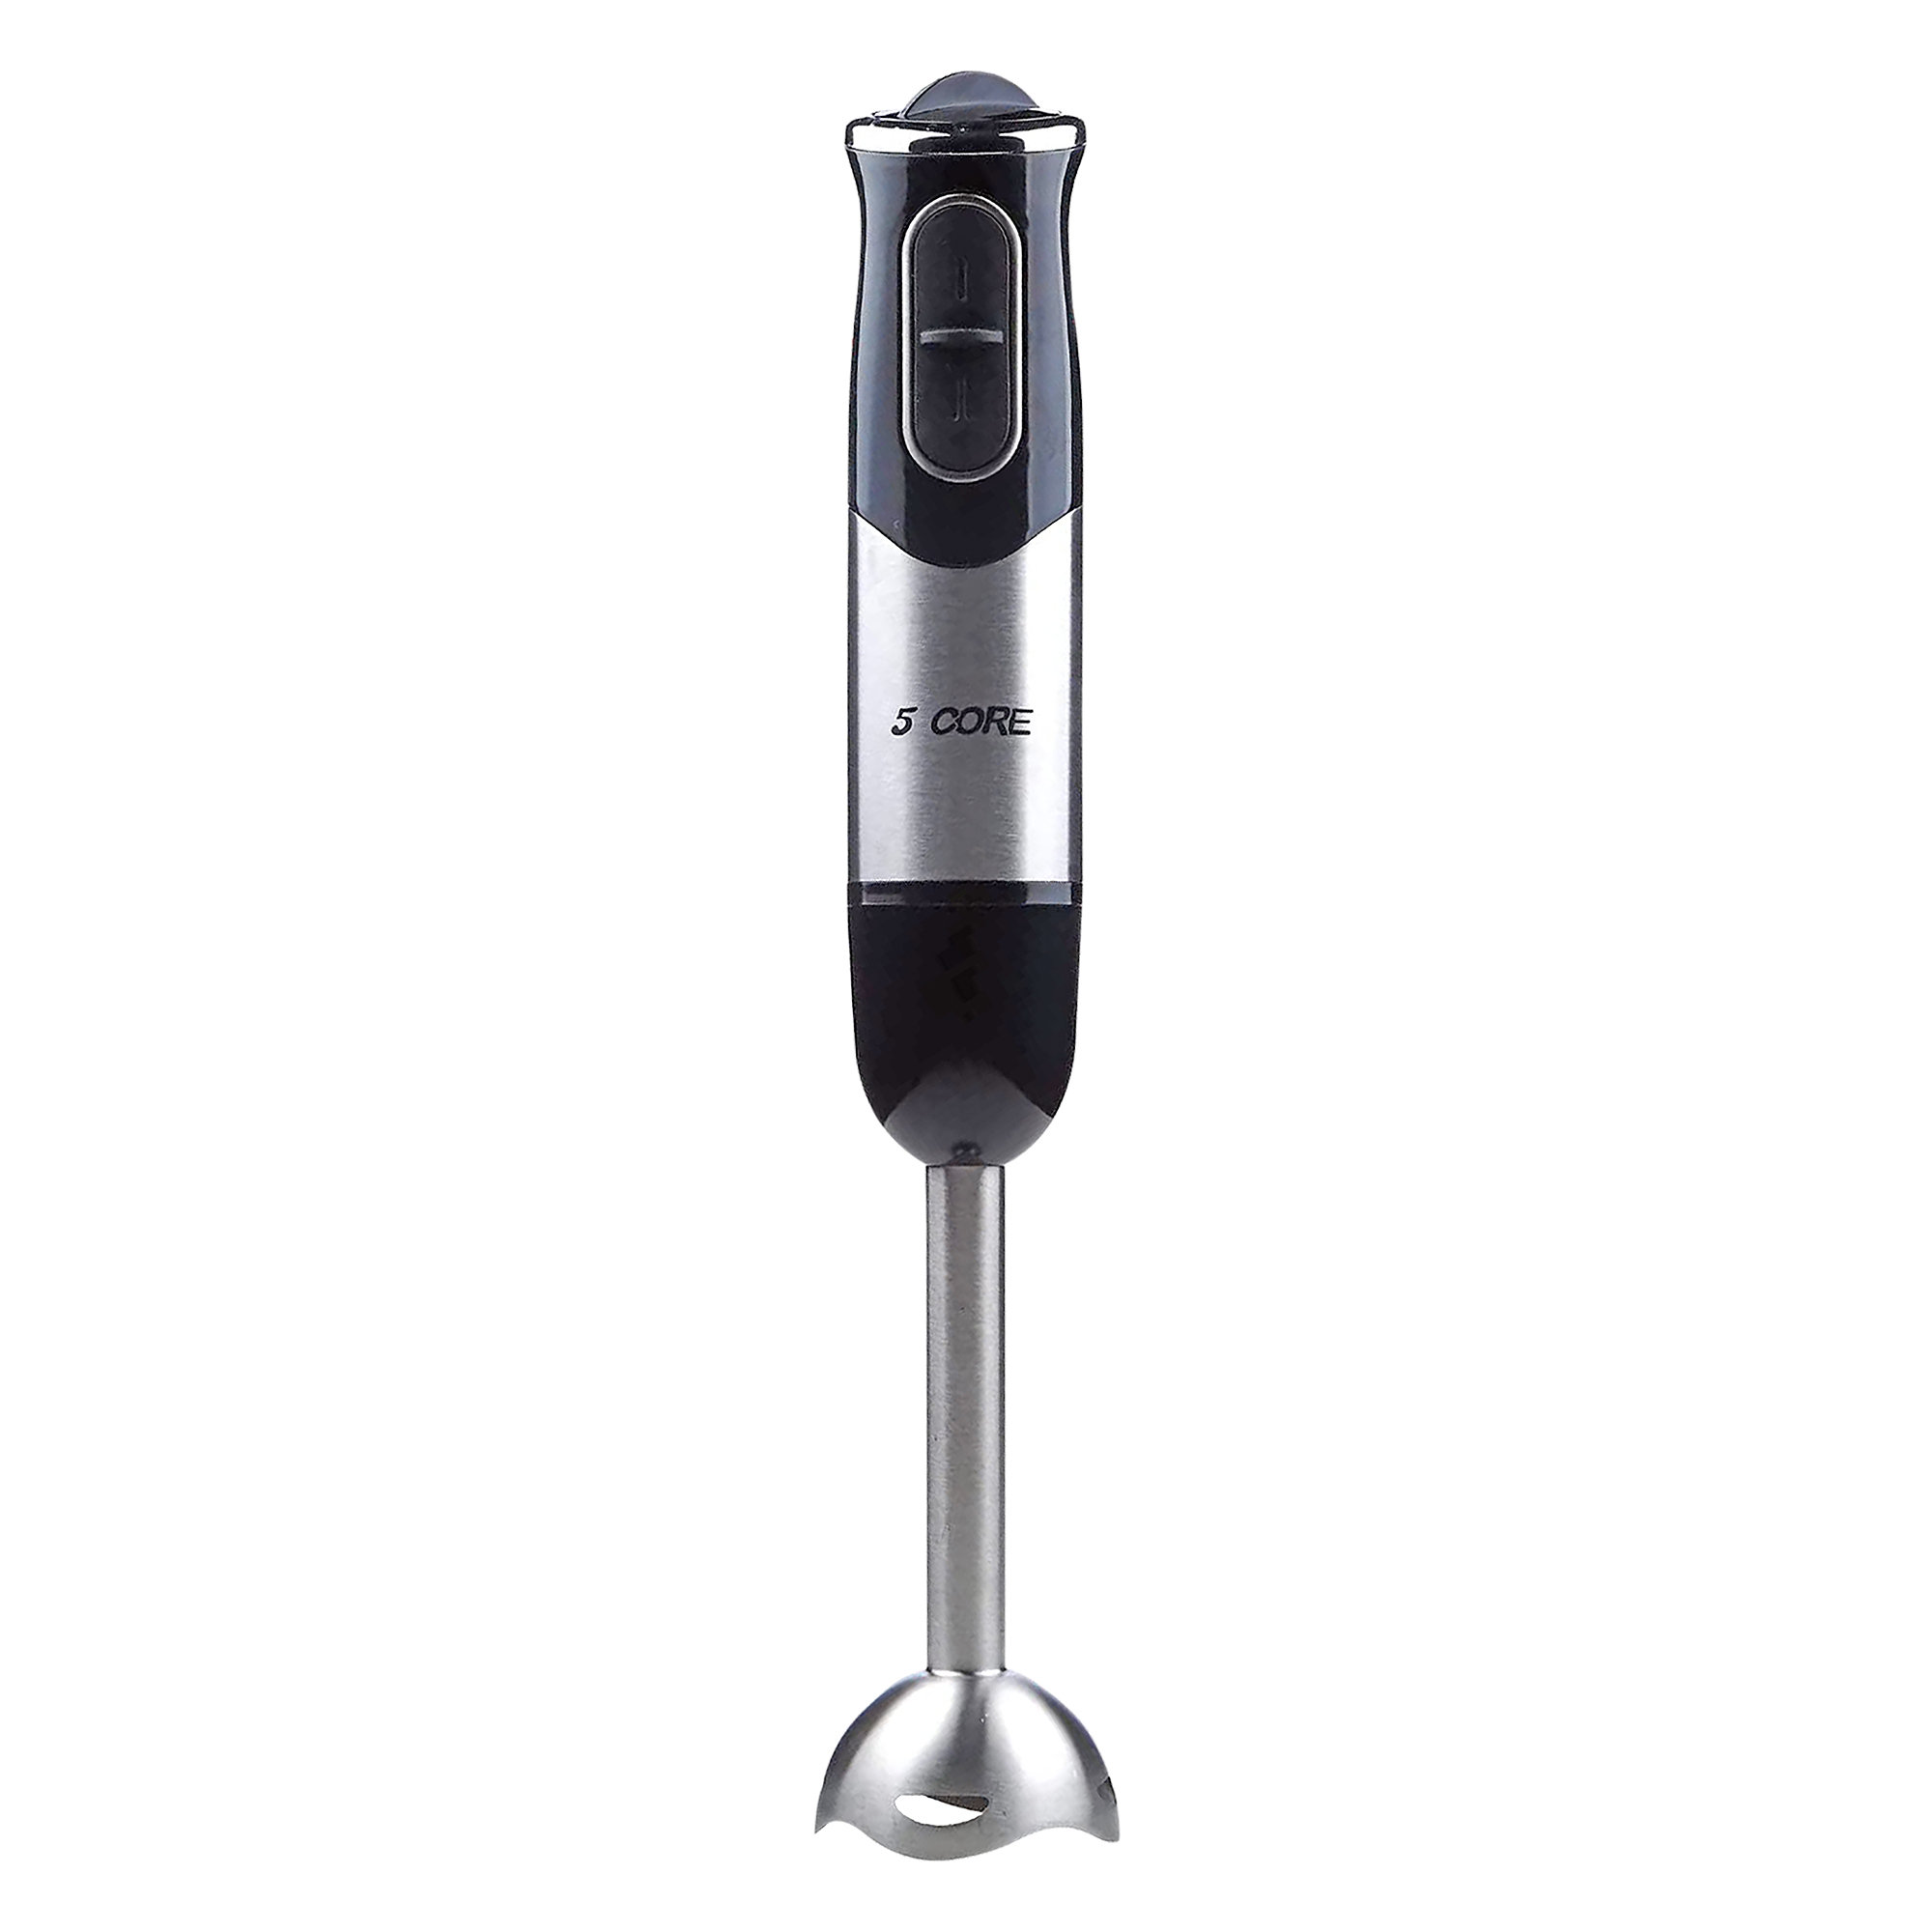 Wayfair HB Blades, Stainless | Blender Hand 5 High-Performance Core Motor 1510 with 500W Steel